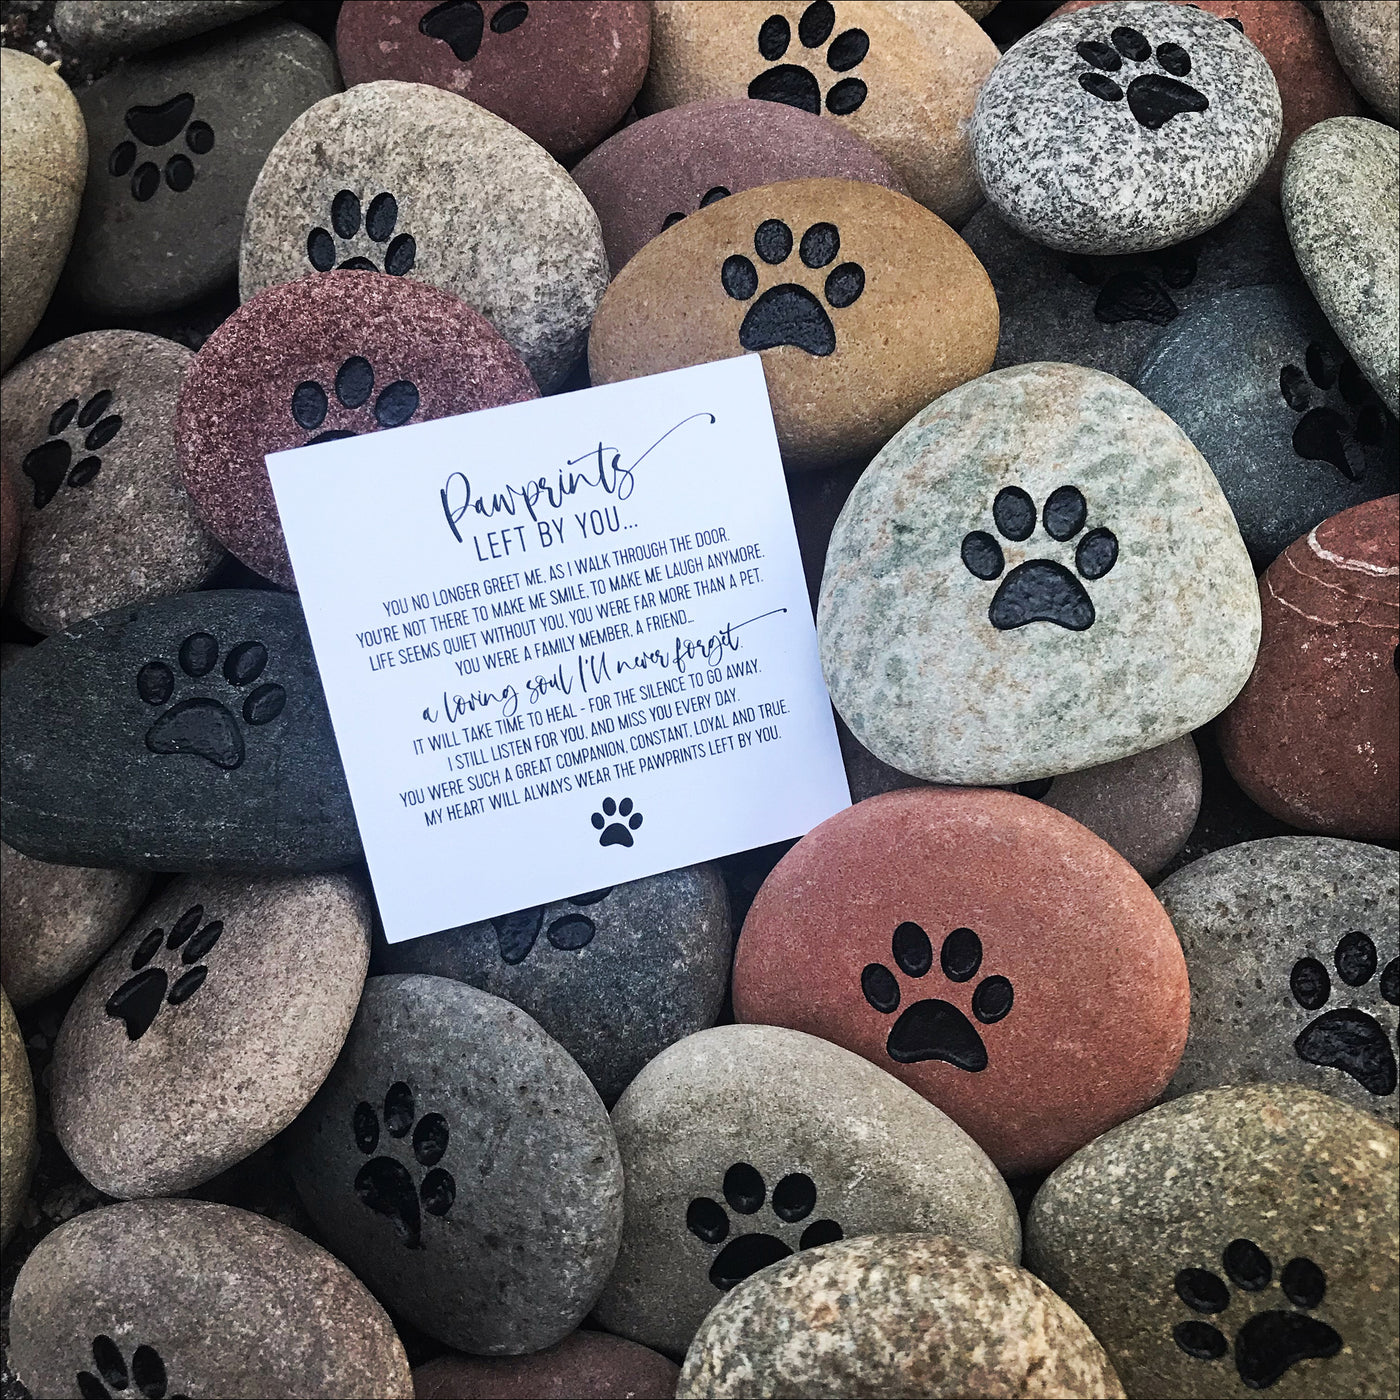 Stones (River Rock) - Pawprints Left By You